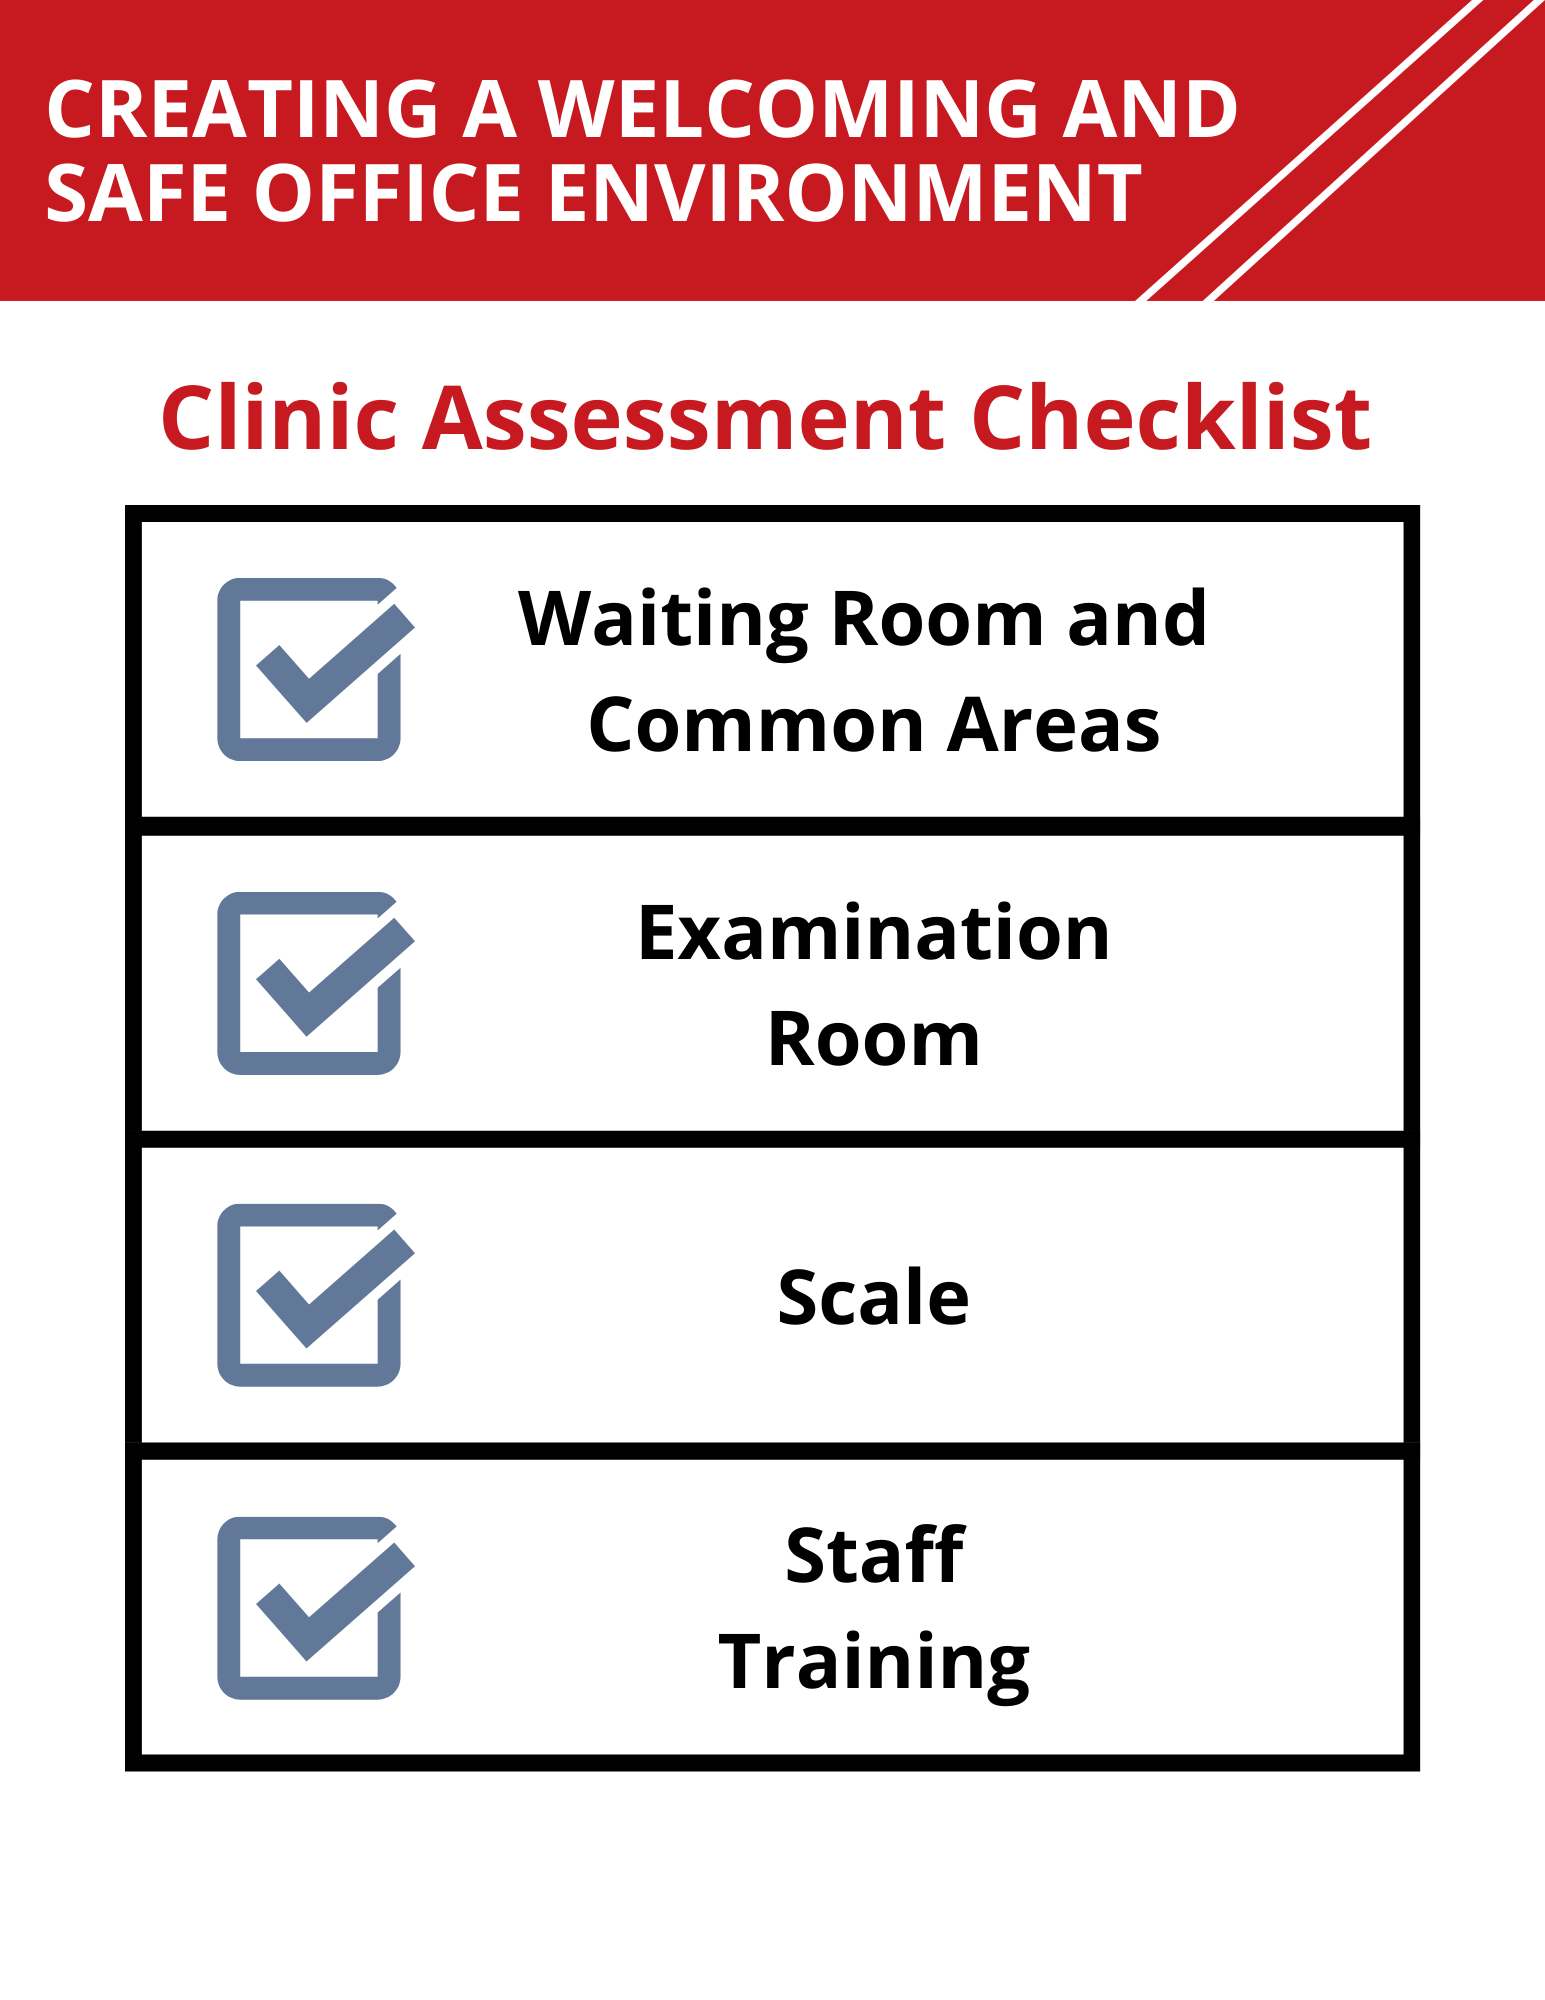 Handout about creating a welcoming clinician’s office for people with high weight.